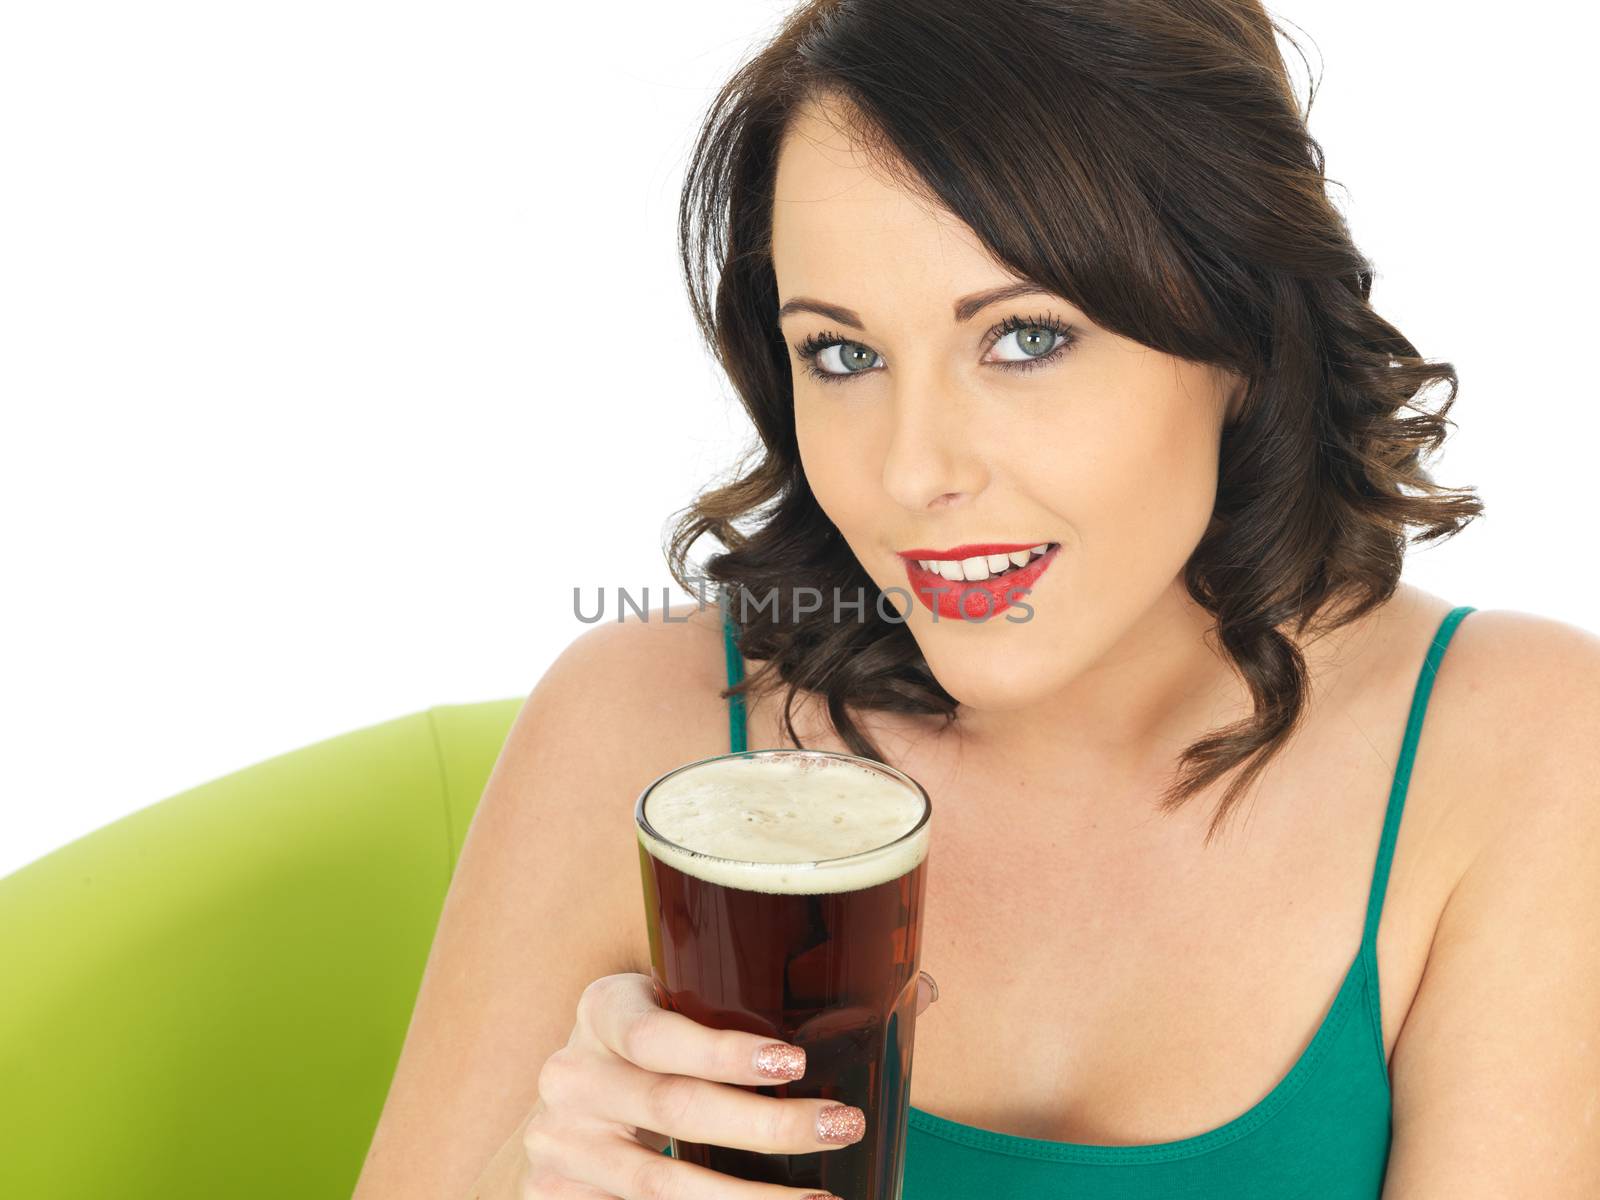 Attractive Relaxed Young Woman Drinking Beer